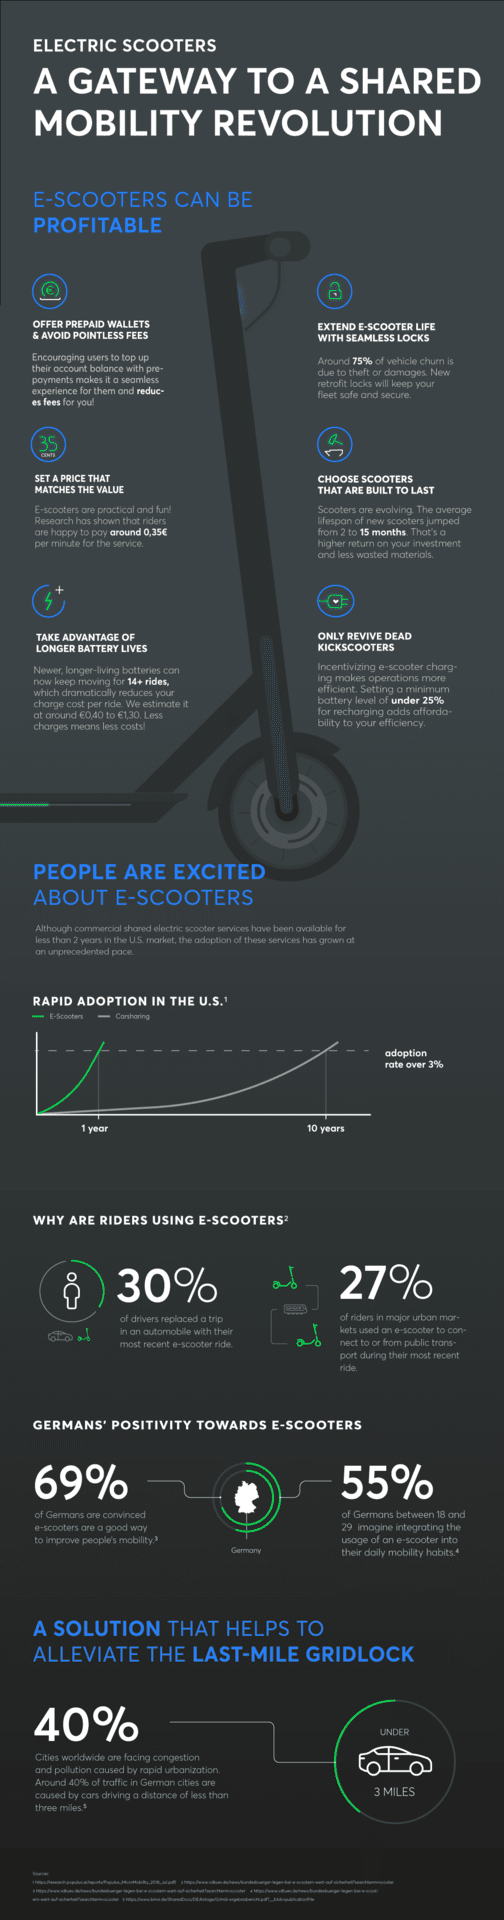 An infographic title Electronic scooters: A gateway to a shared mobility revolution.